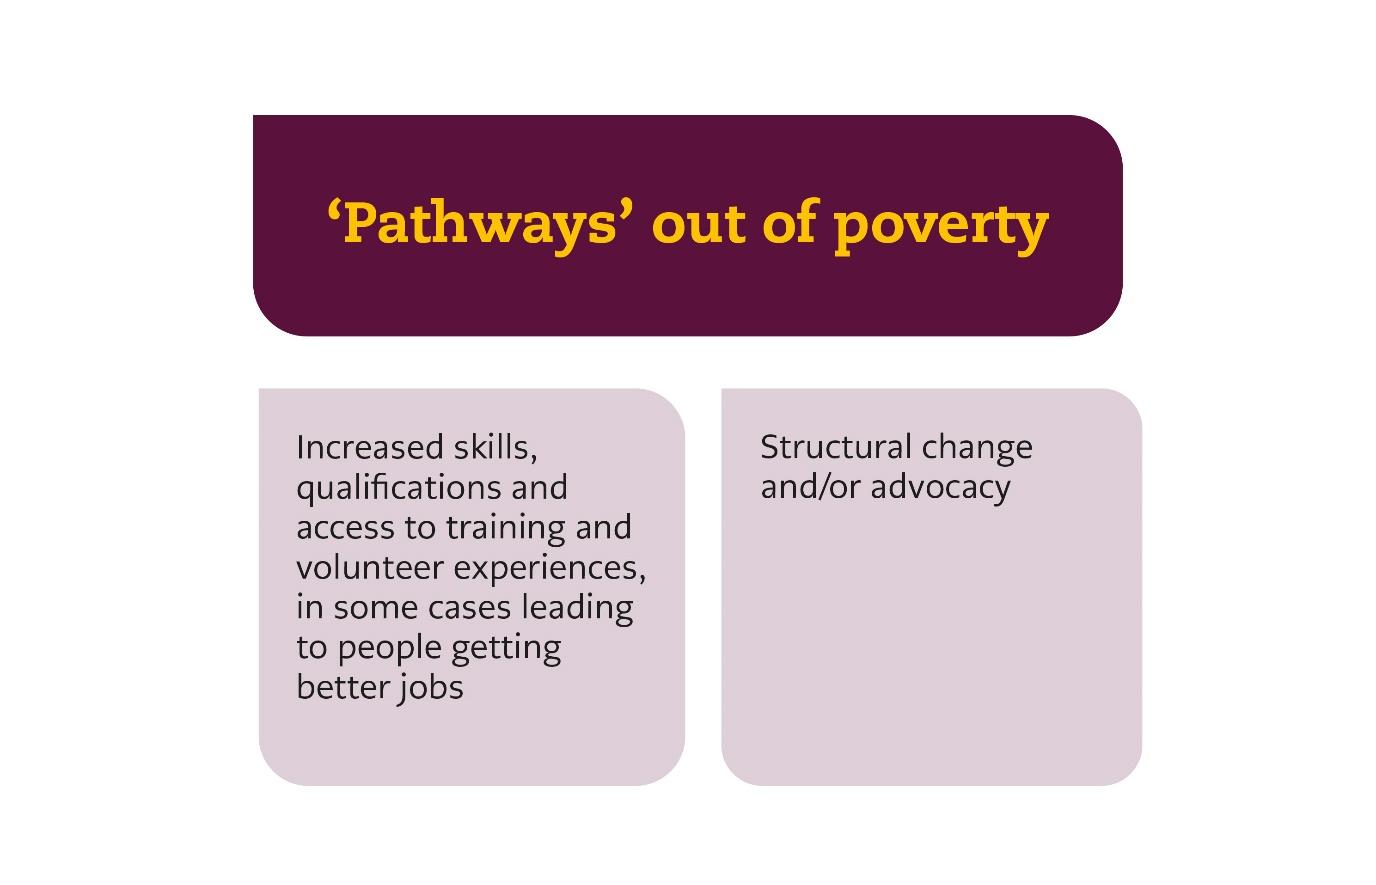 The image shows an infographic describing ‘Pathways’ out of poverty. The text says: ‘Pathways’ out of poverty Increased skills, qualifications and access to training and volunteer experiences, in some cases leading to people getting better jobs Structural change and/or advocacy 